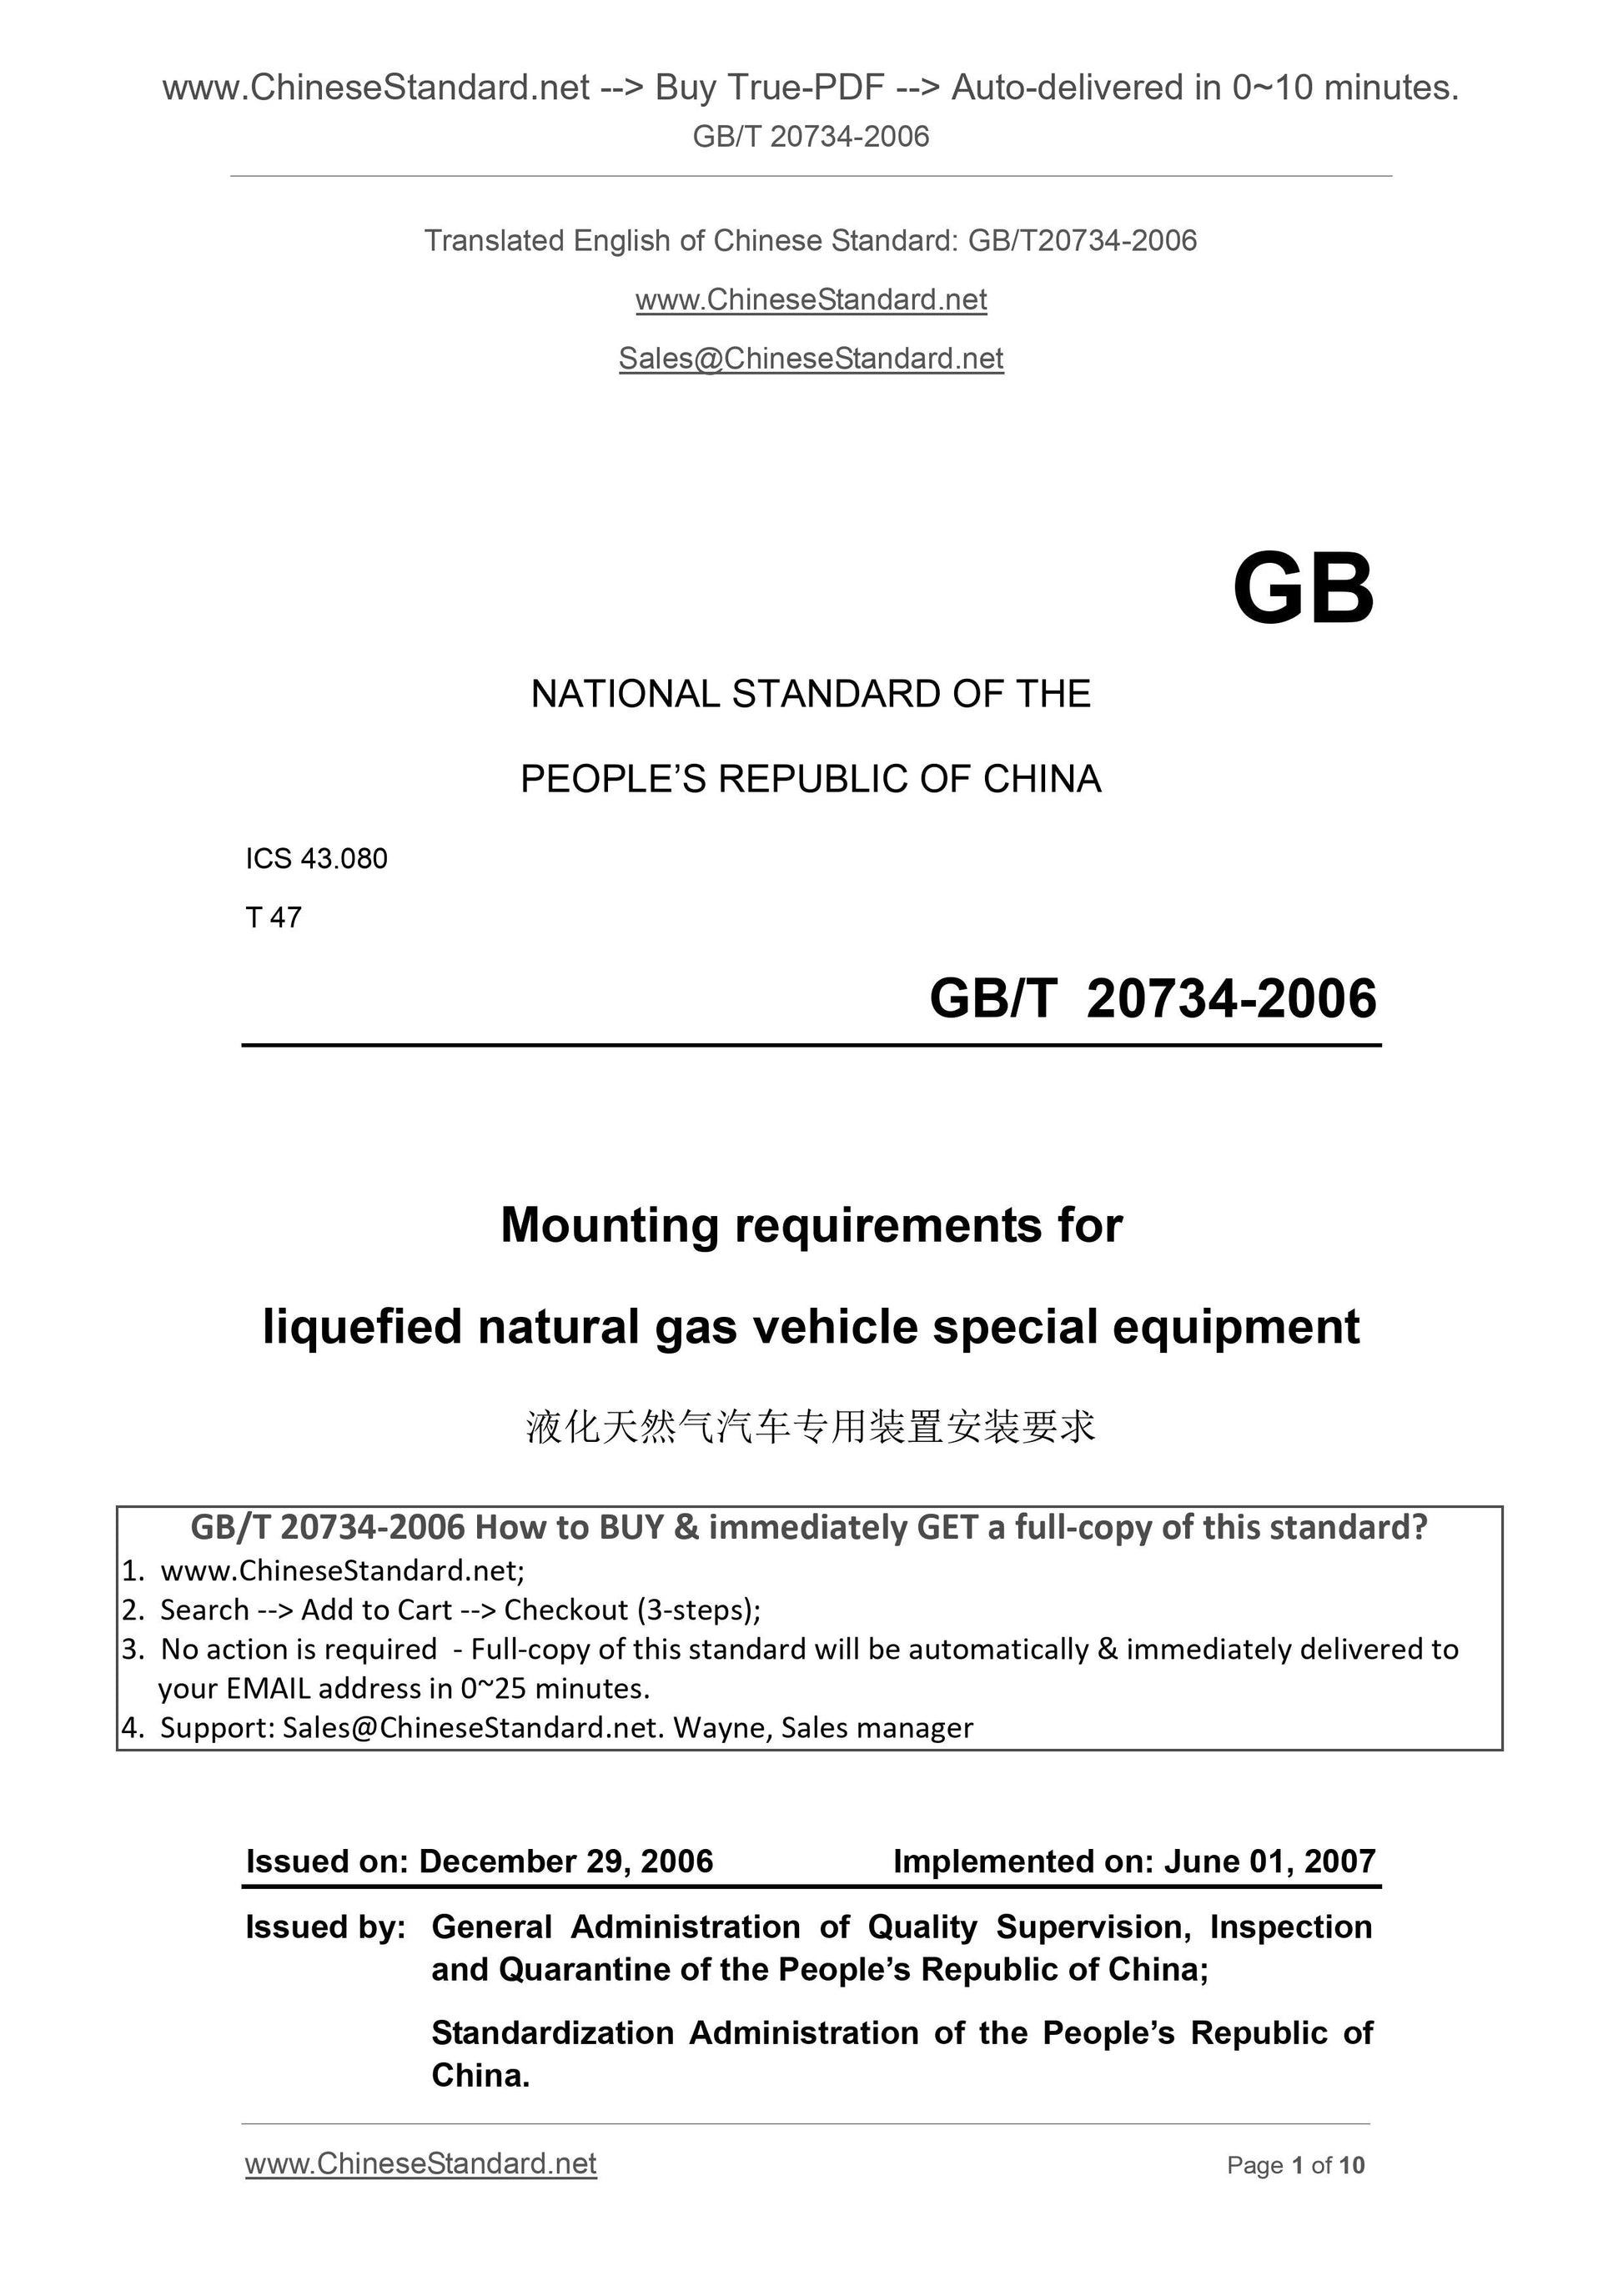 GB/T 20734-2006 Page 1